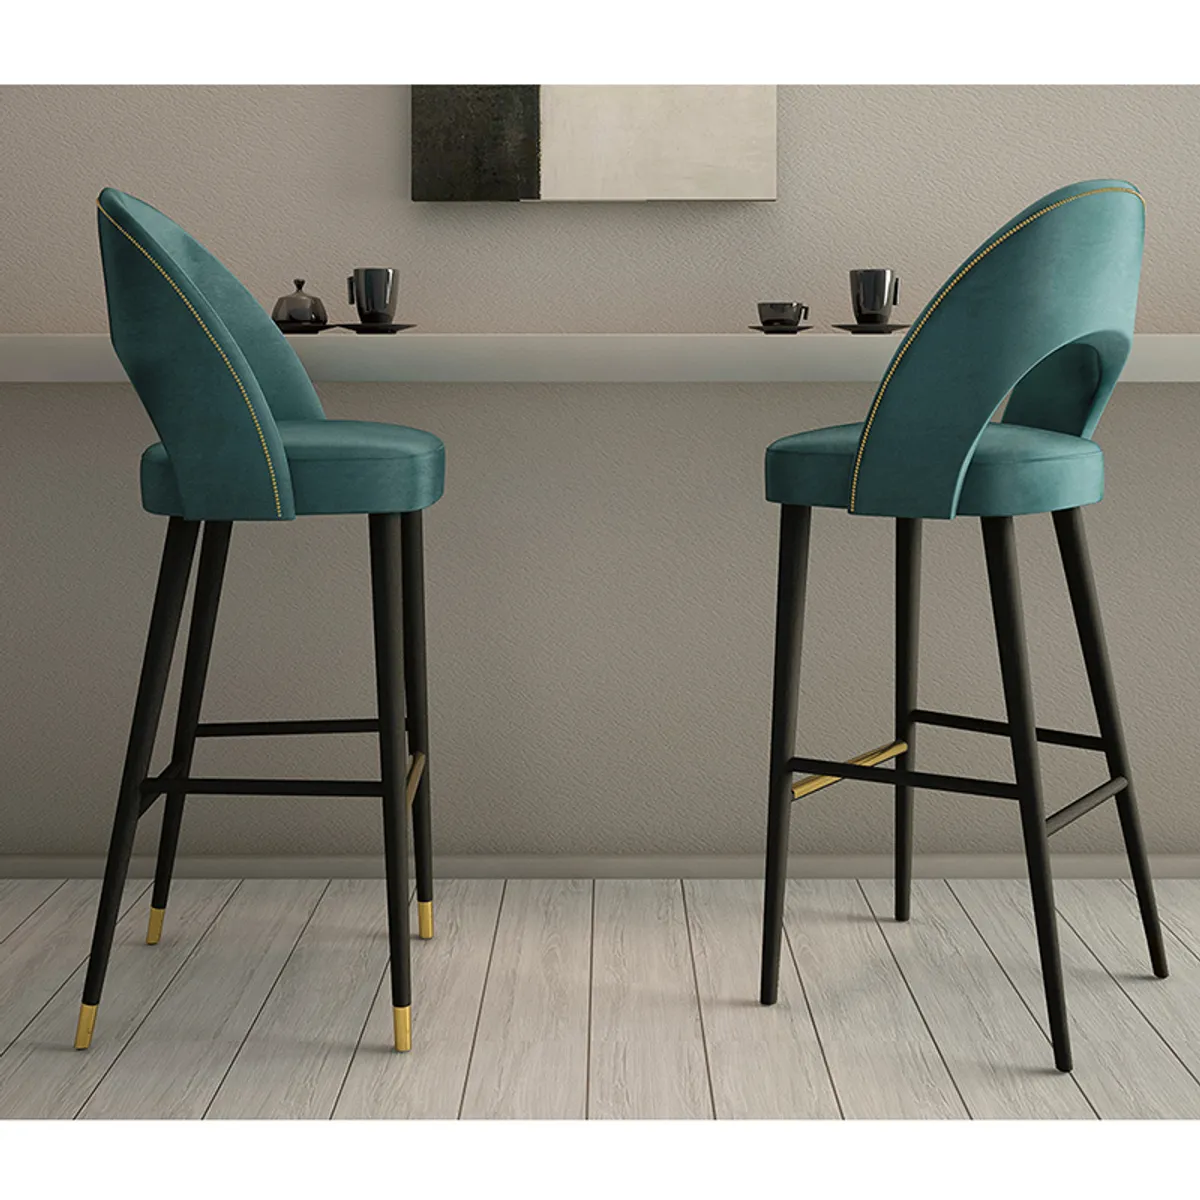 emilia-bar-stool-upholstered-stool-with-wooden-legs 44